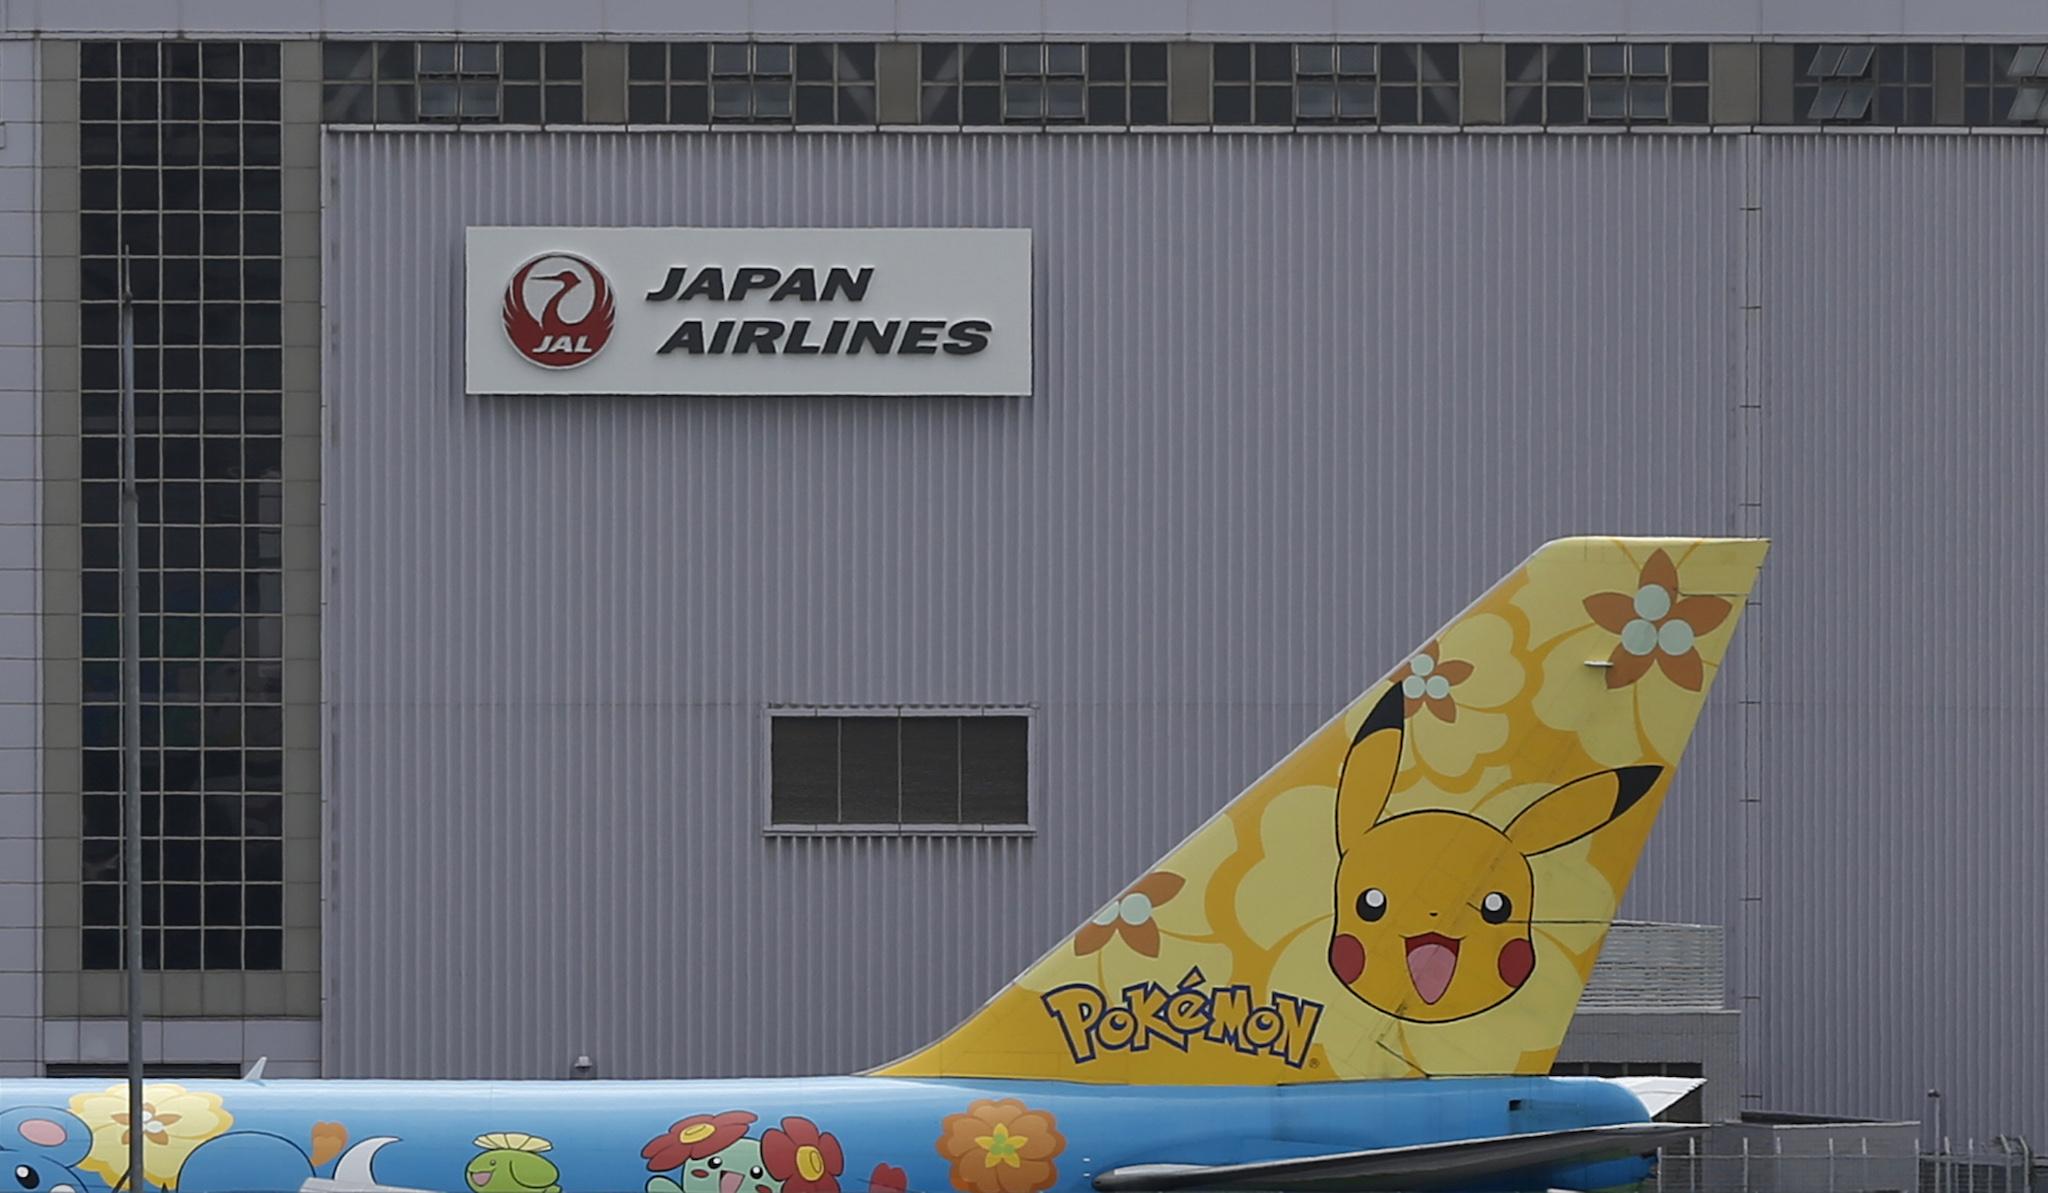 The logo of Japan Airlines (JAL) is seen on a hangar as All Nippon Airways' (ANA) Pokemon Jet moves past it at Haneda airport in Tokyo September 19, 2012